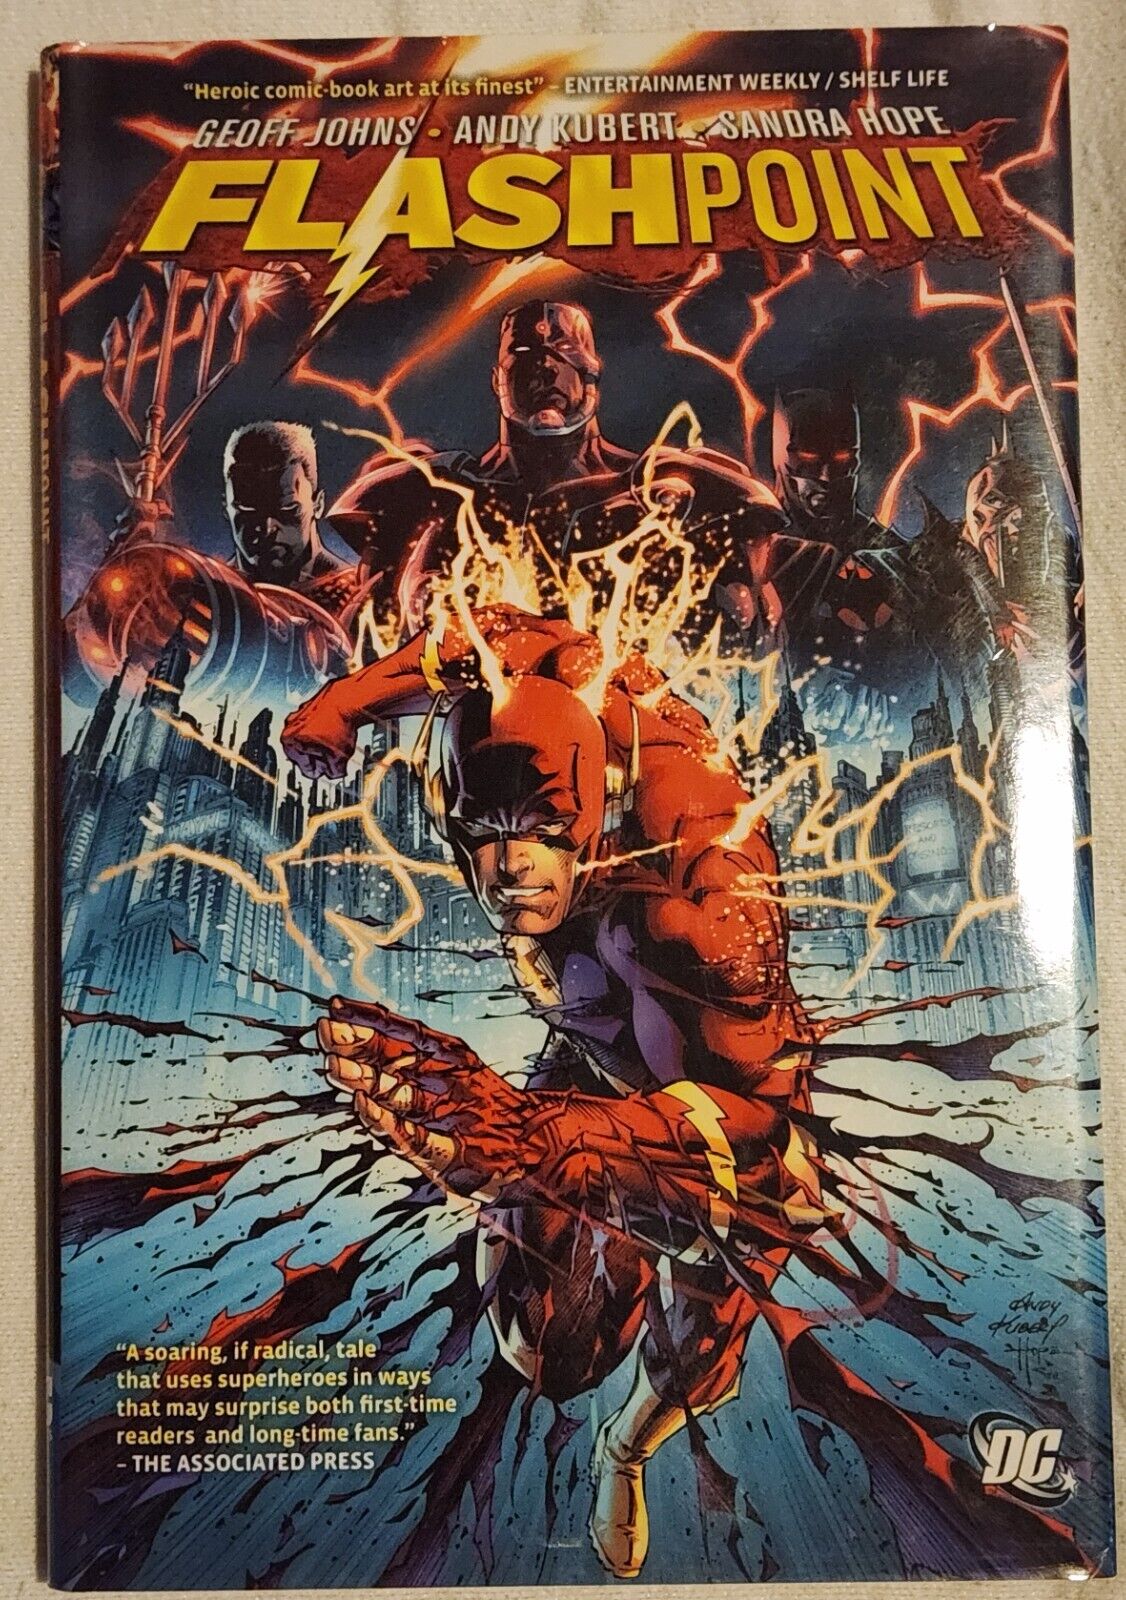 Flashpoint Hardcover - DC Comics 2011 HC with Jacket, Geoff Johns, Andy Kubert